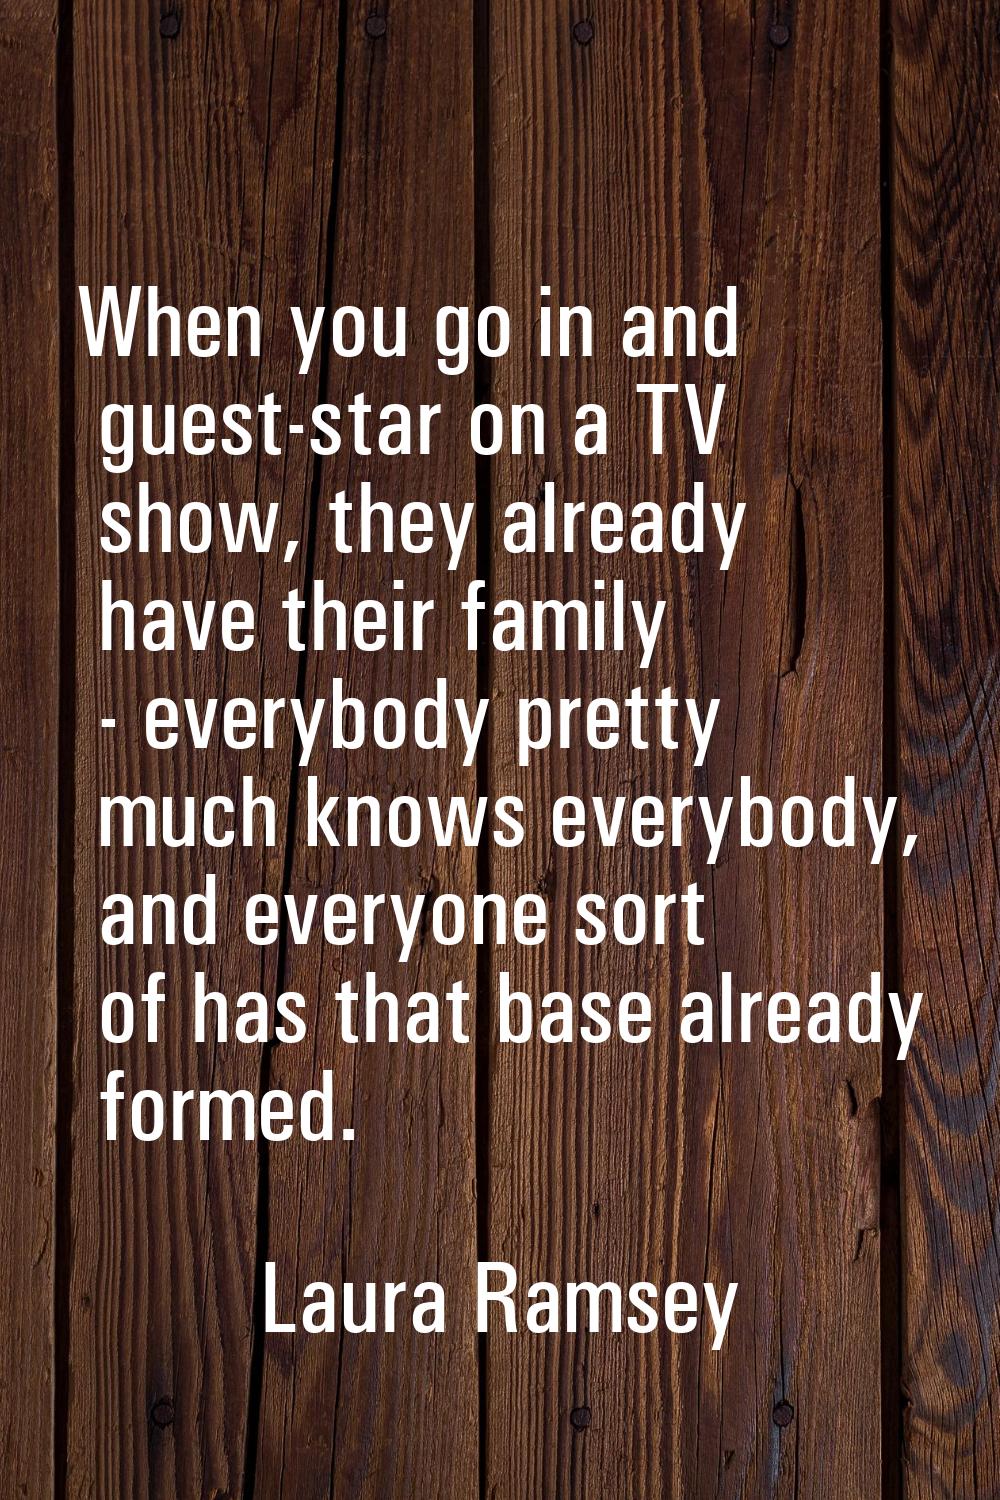 When you go in and guest-star on a TV show, they already have their family - everybody pretty much 